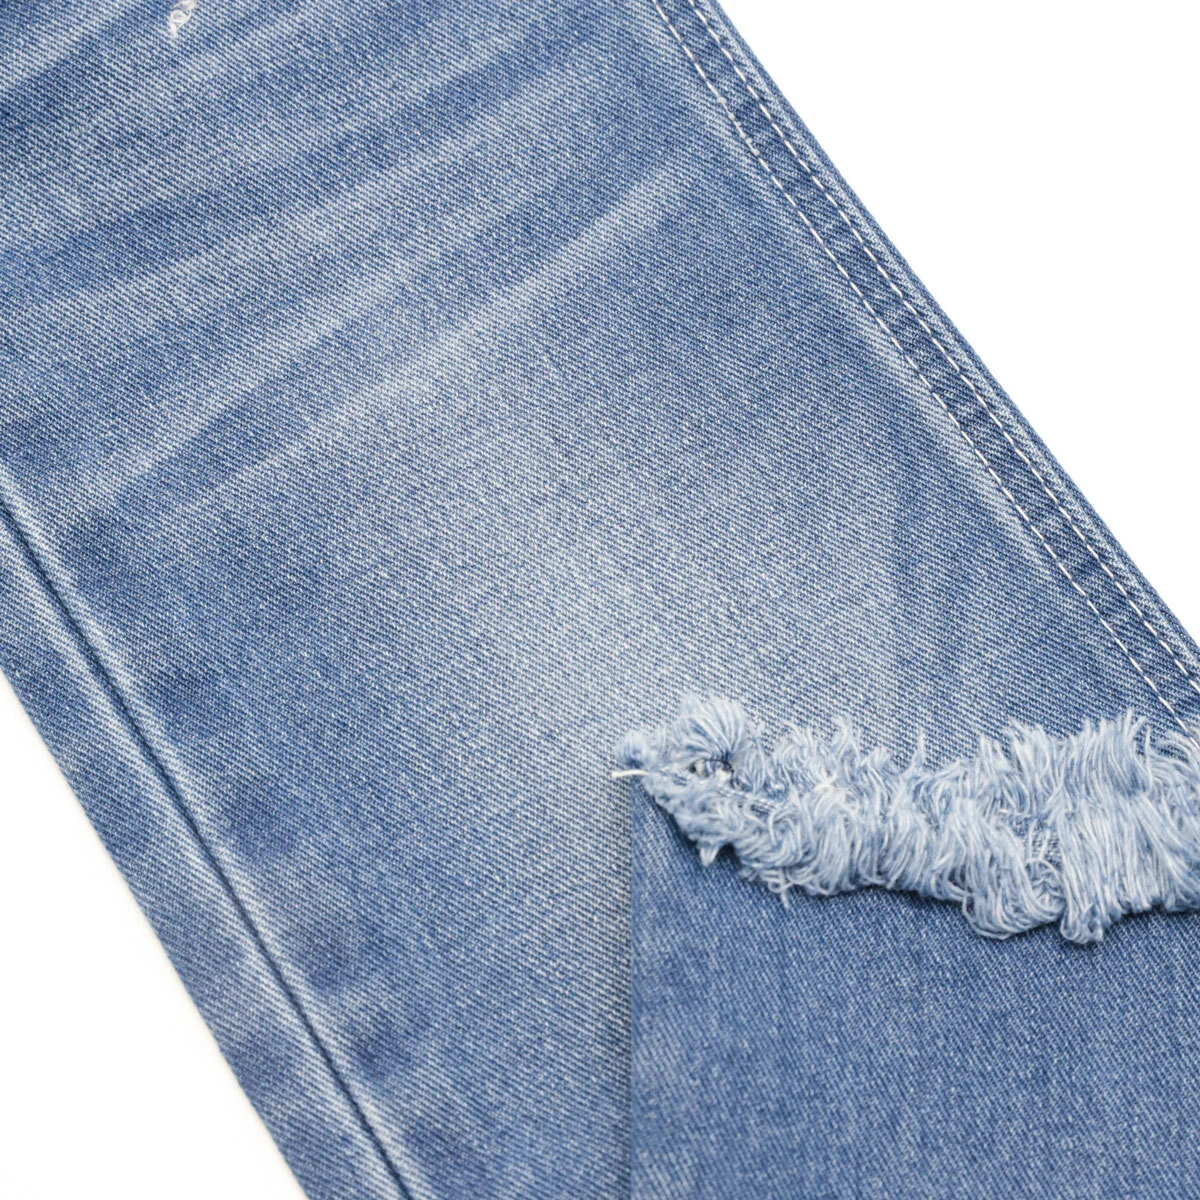 200C-4 Non- stretch Rolls of Denim Fabric for Jeans 3